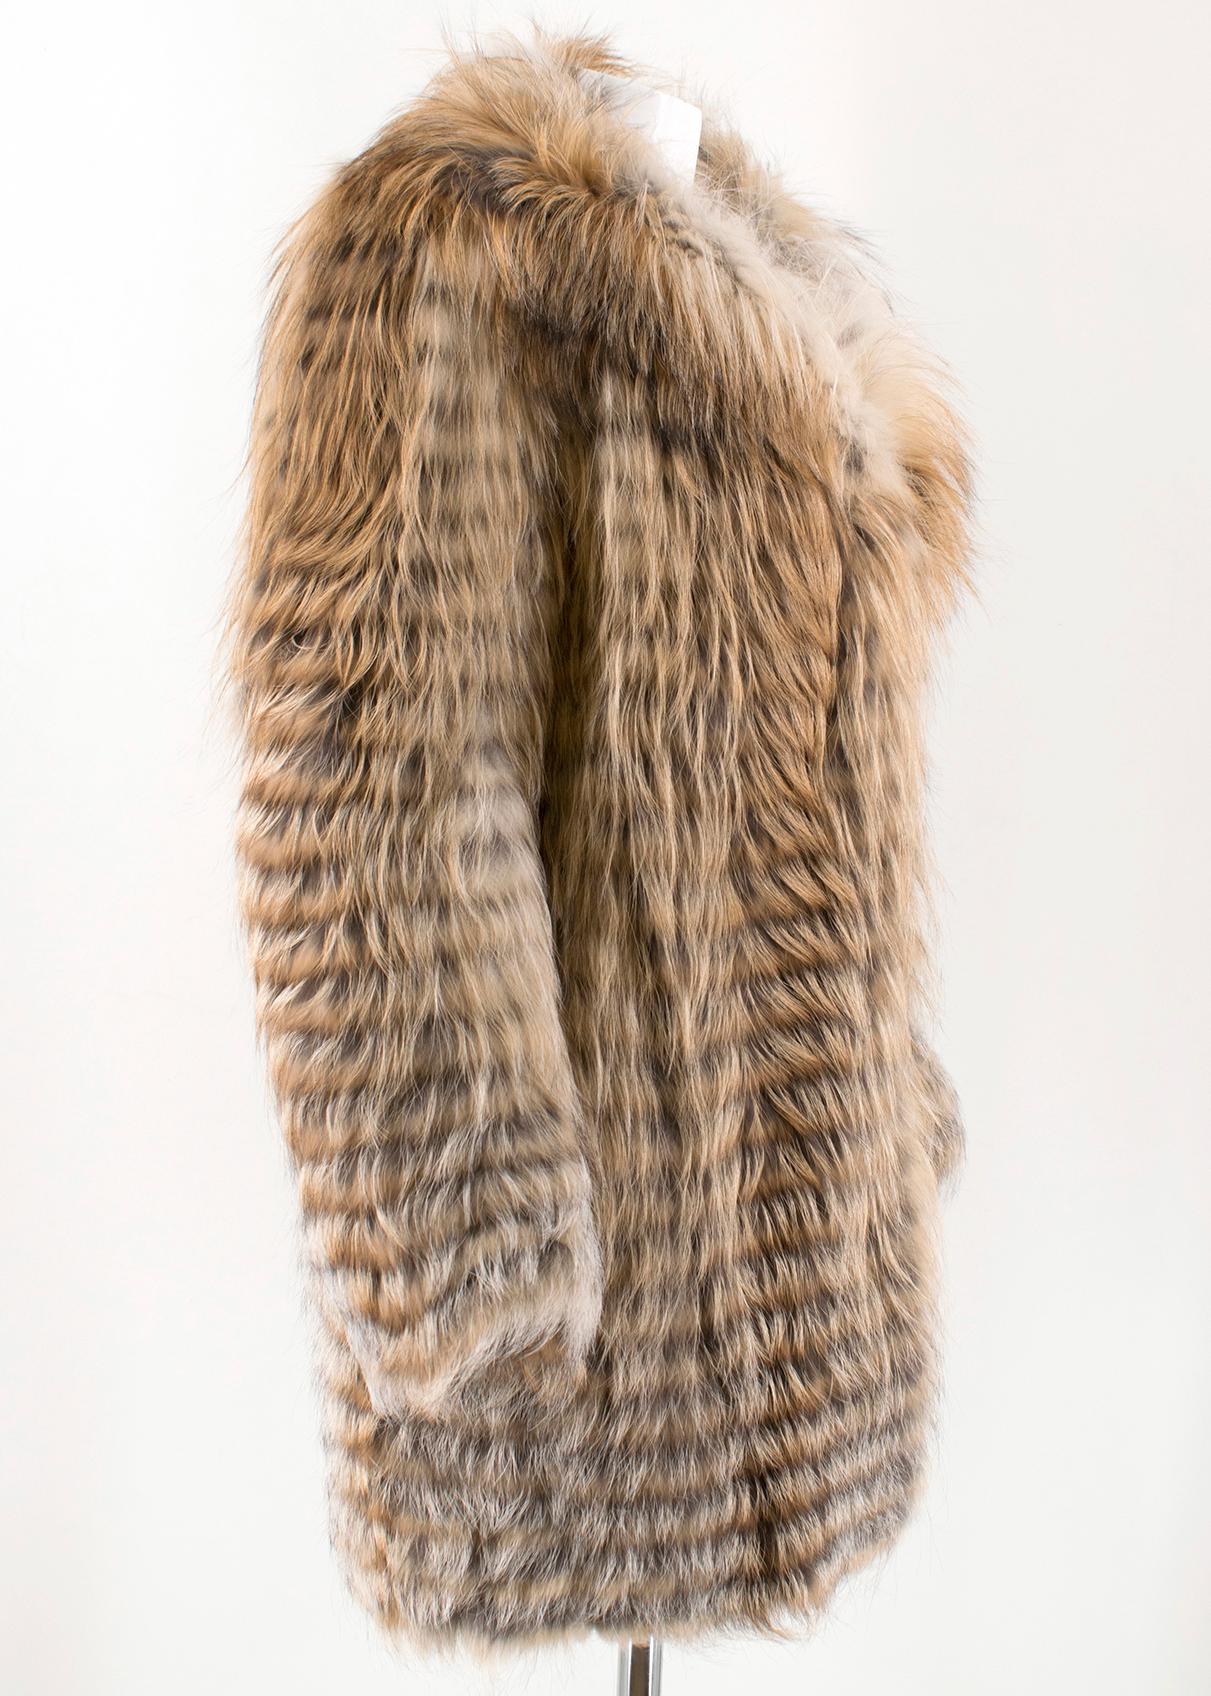 Celine Fox Fur Coat

- Lightweight coat made out of natural striped fox fur
- Lined with brown silk
- Hook & eye fastening
- Foldover collar


Postage is set to cover insurance and will be confirmed upon sale. Please contact admin if you have any